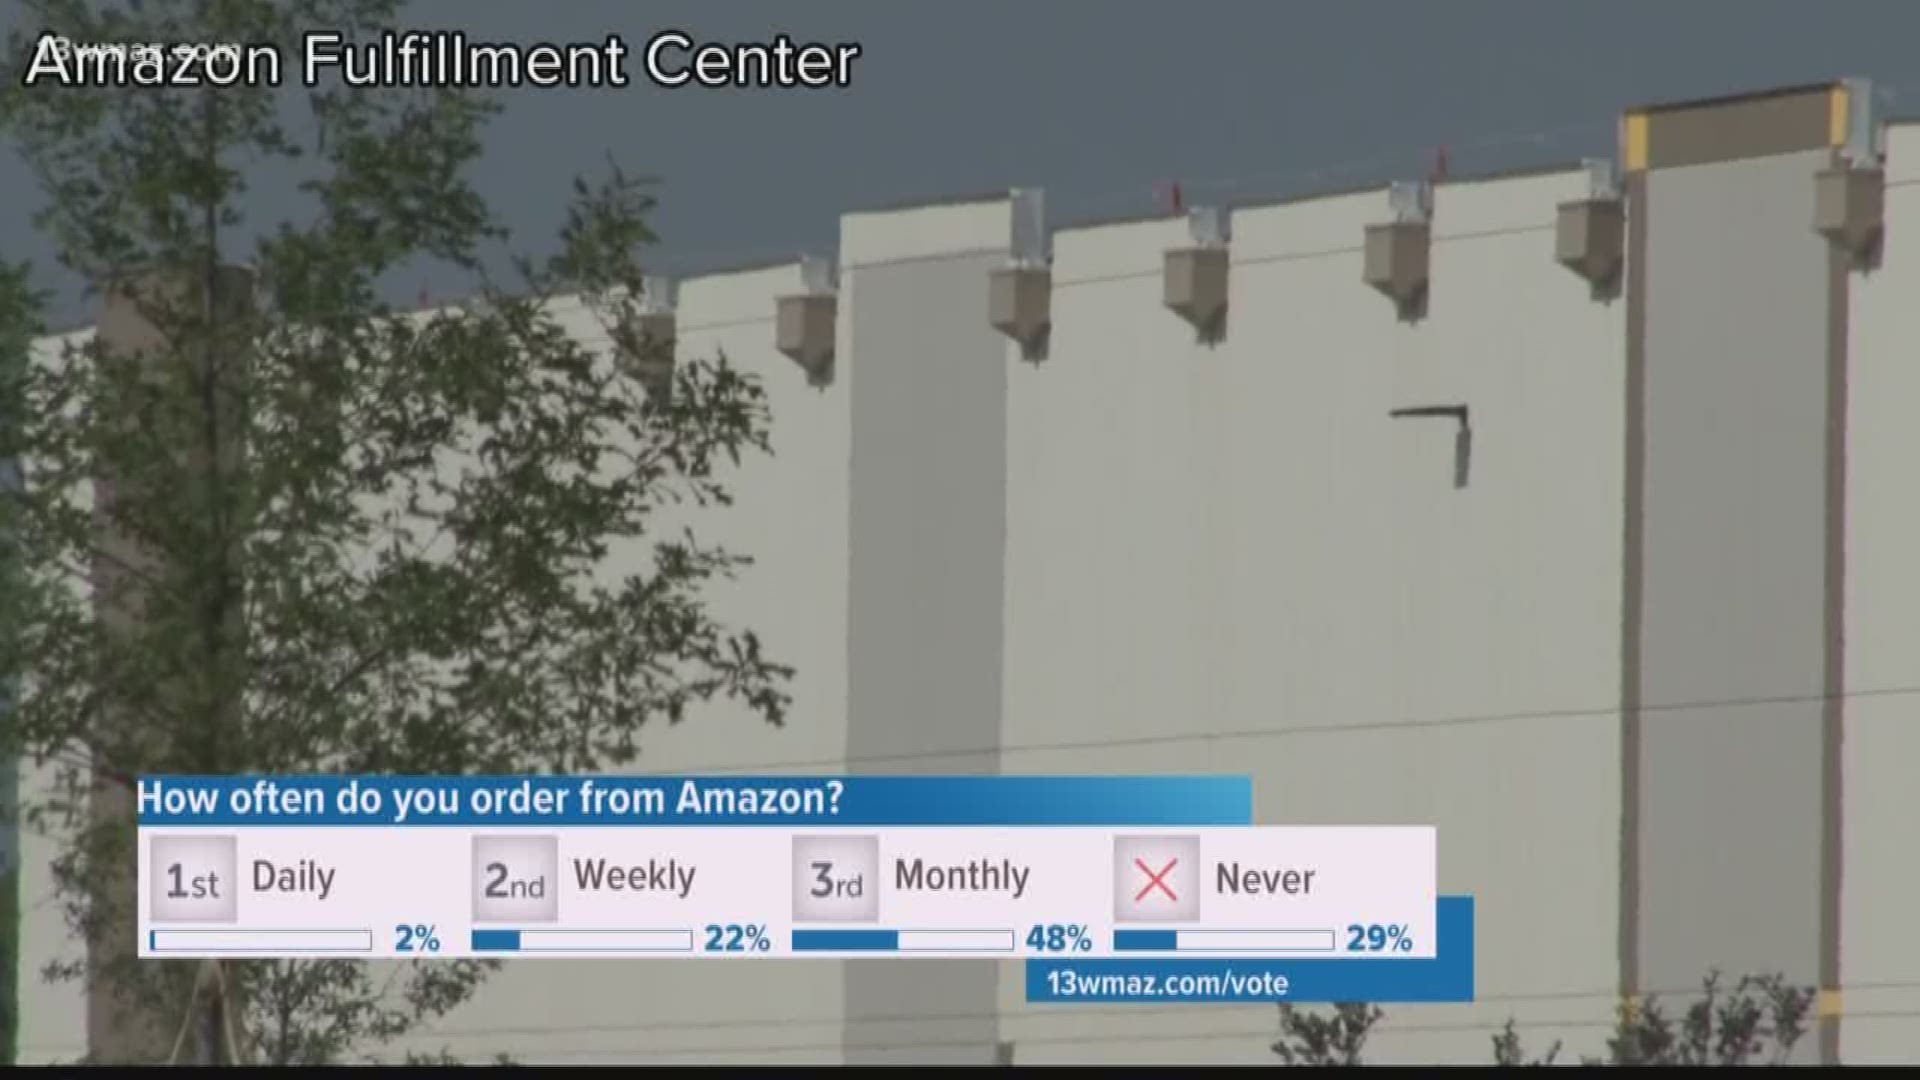 Many people have been looking forward to Macon's Amazon Fulfillment Center. Now, the company has finally confirmed they are looking hire 500 people. They will be attending a job fair, and here's how you can apply.